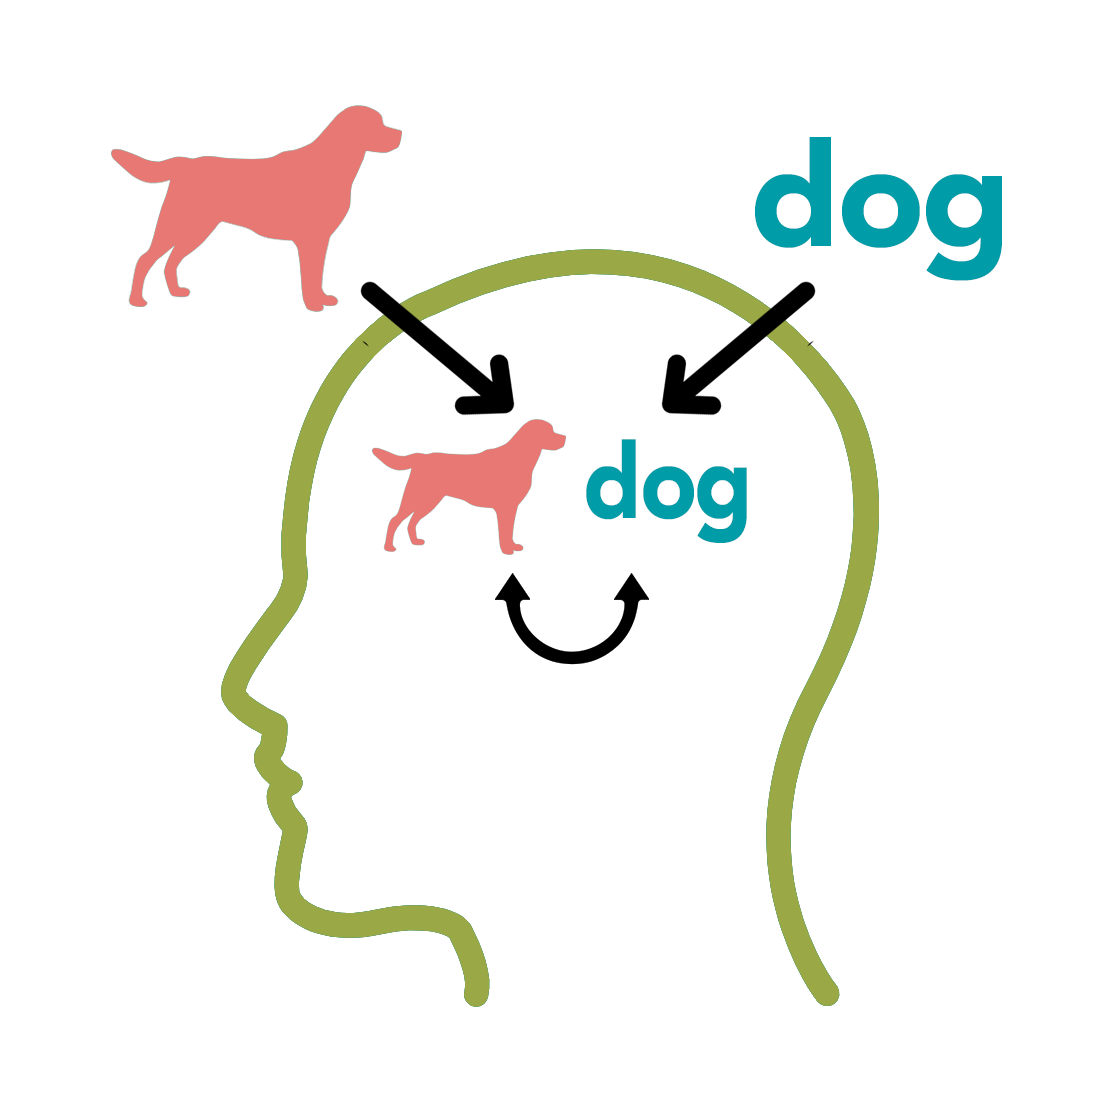 Dog-image-and-dog-text-stored-in-the brain